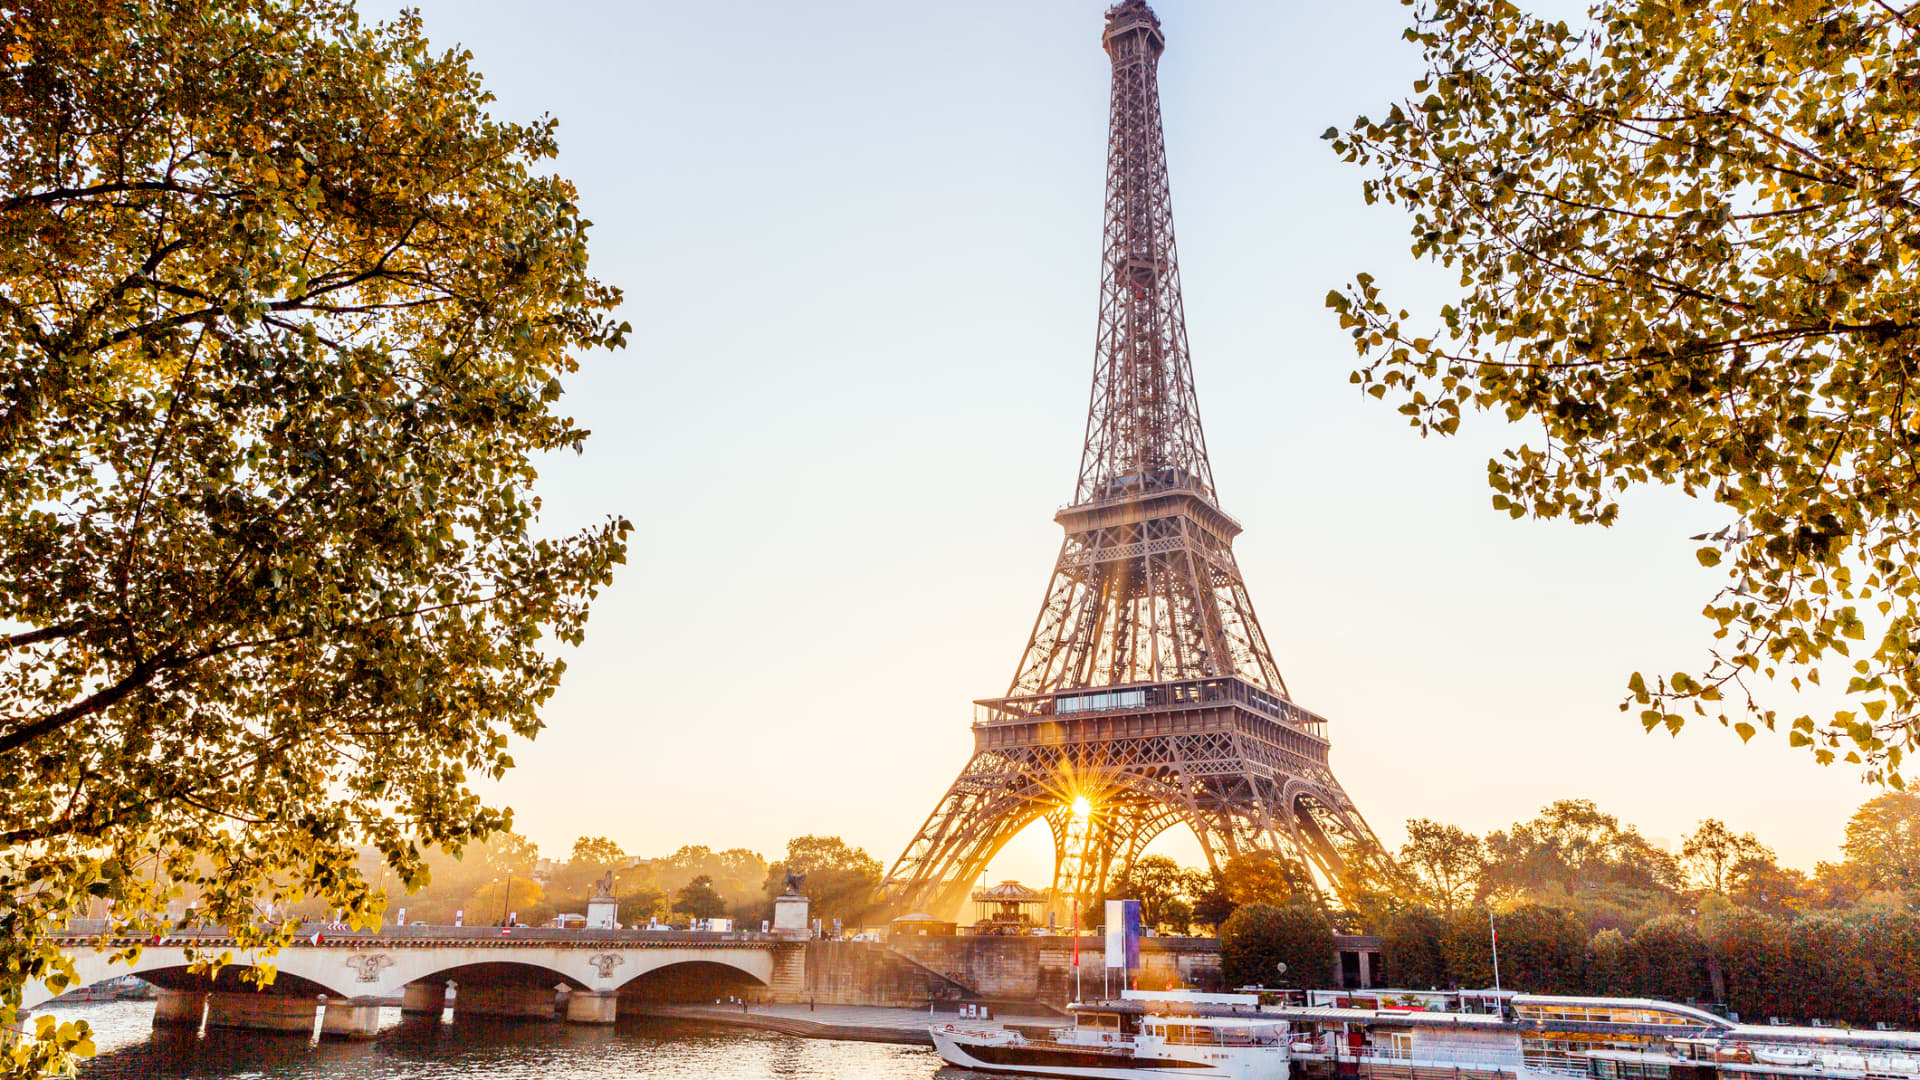 The Eiffel Tower and Seine River at sunrise in Paris.